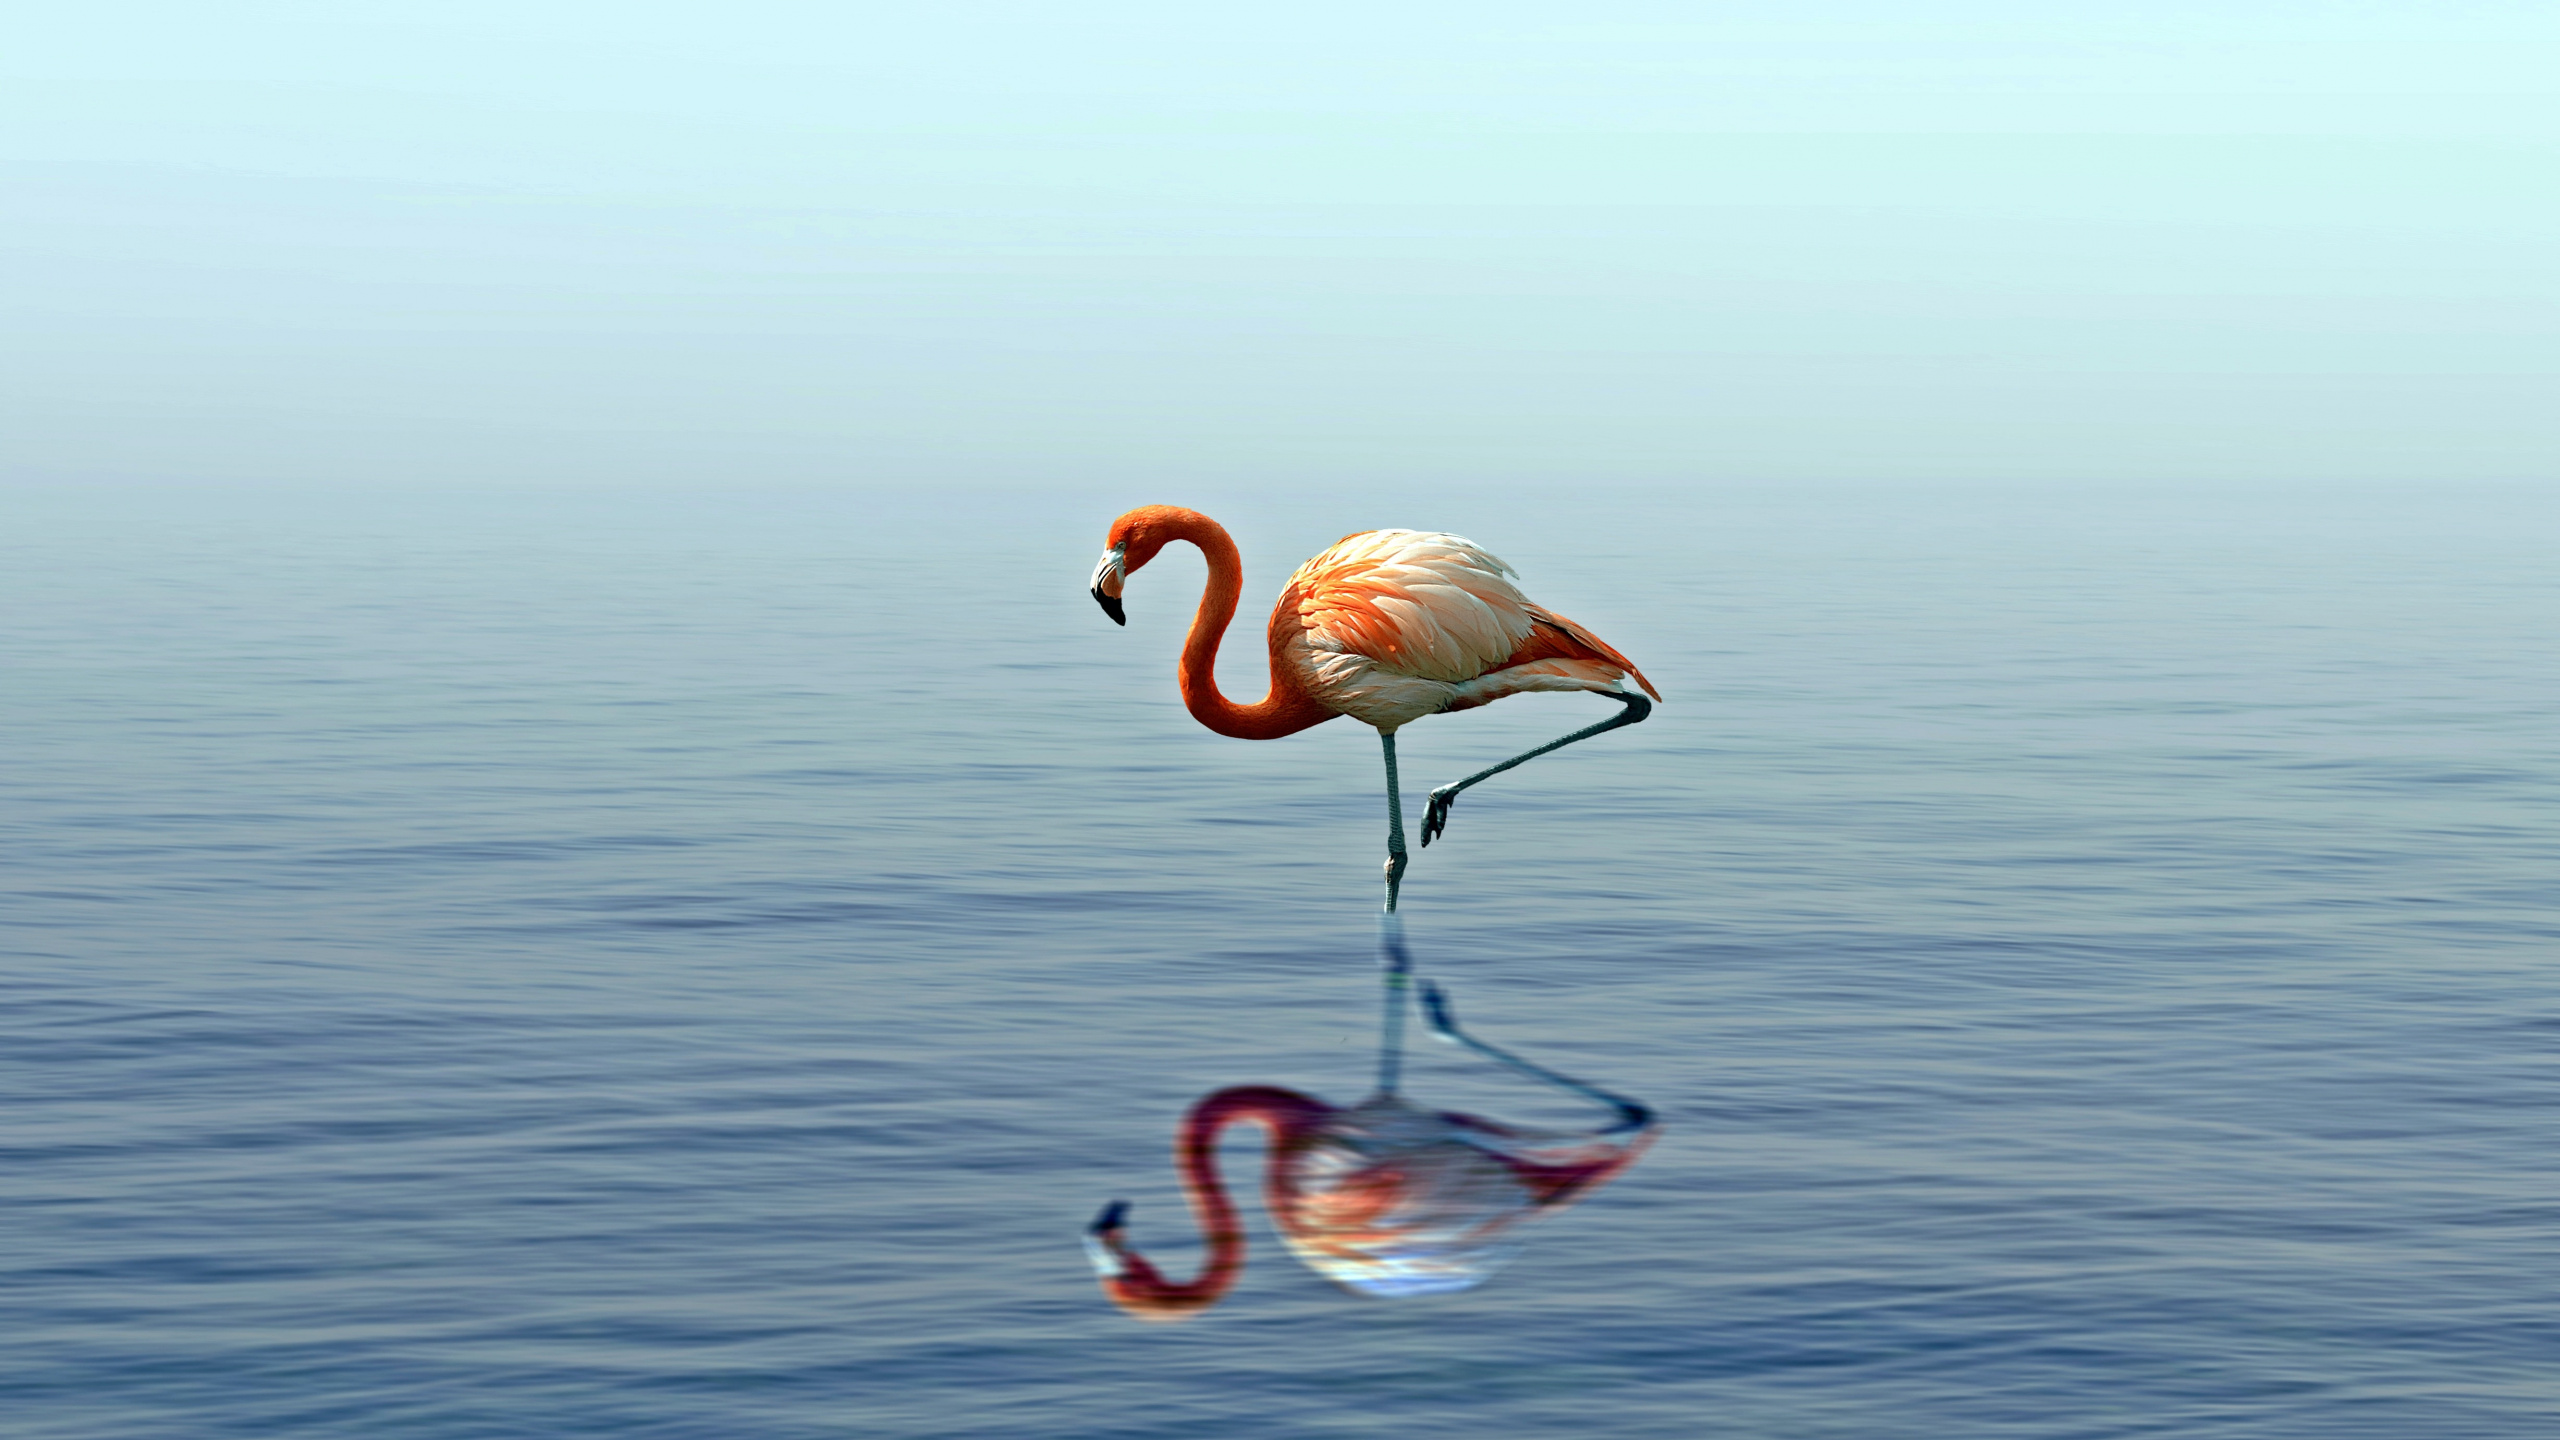 Pink Flamingo on Water During Daytime. Wallpaper in 2560x1440 Resolution